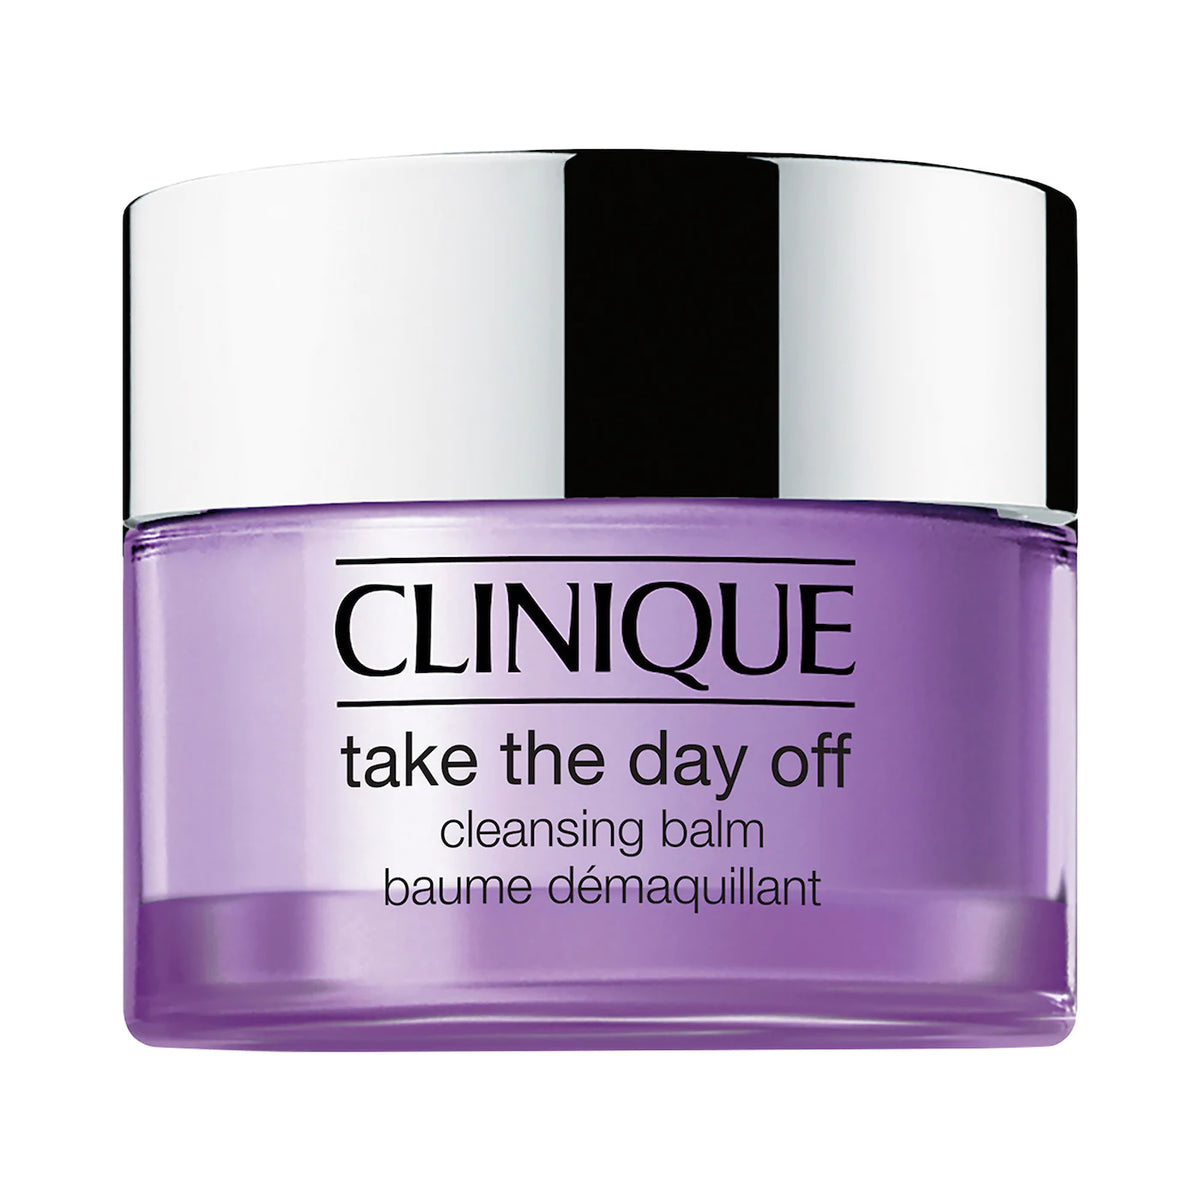 Clinique Take The Day Off Cleansing Balm Makeup Remover Makeup balm Remover Volare Makeup 30 ml  